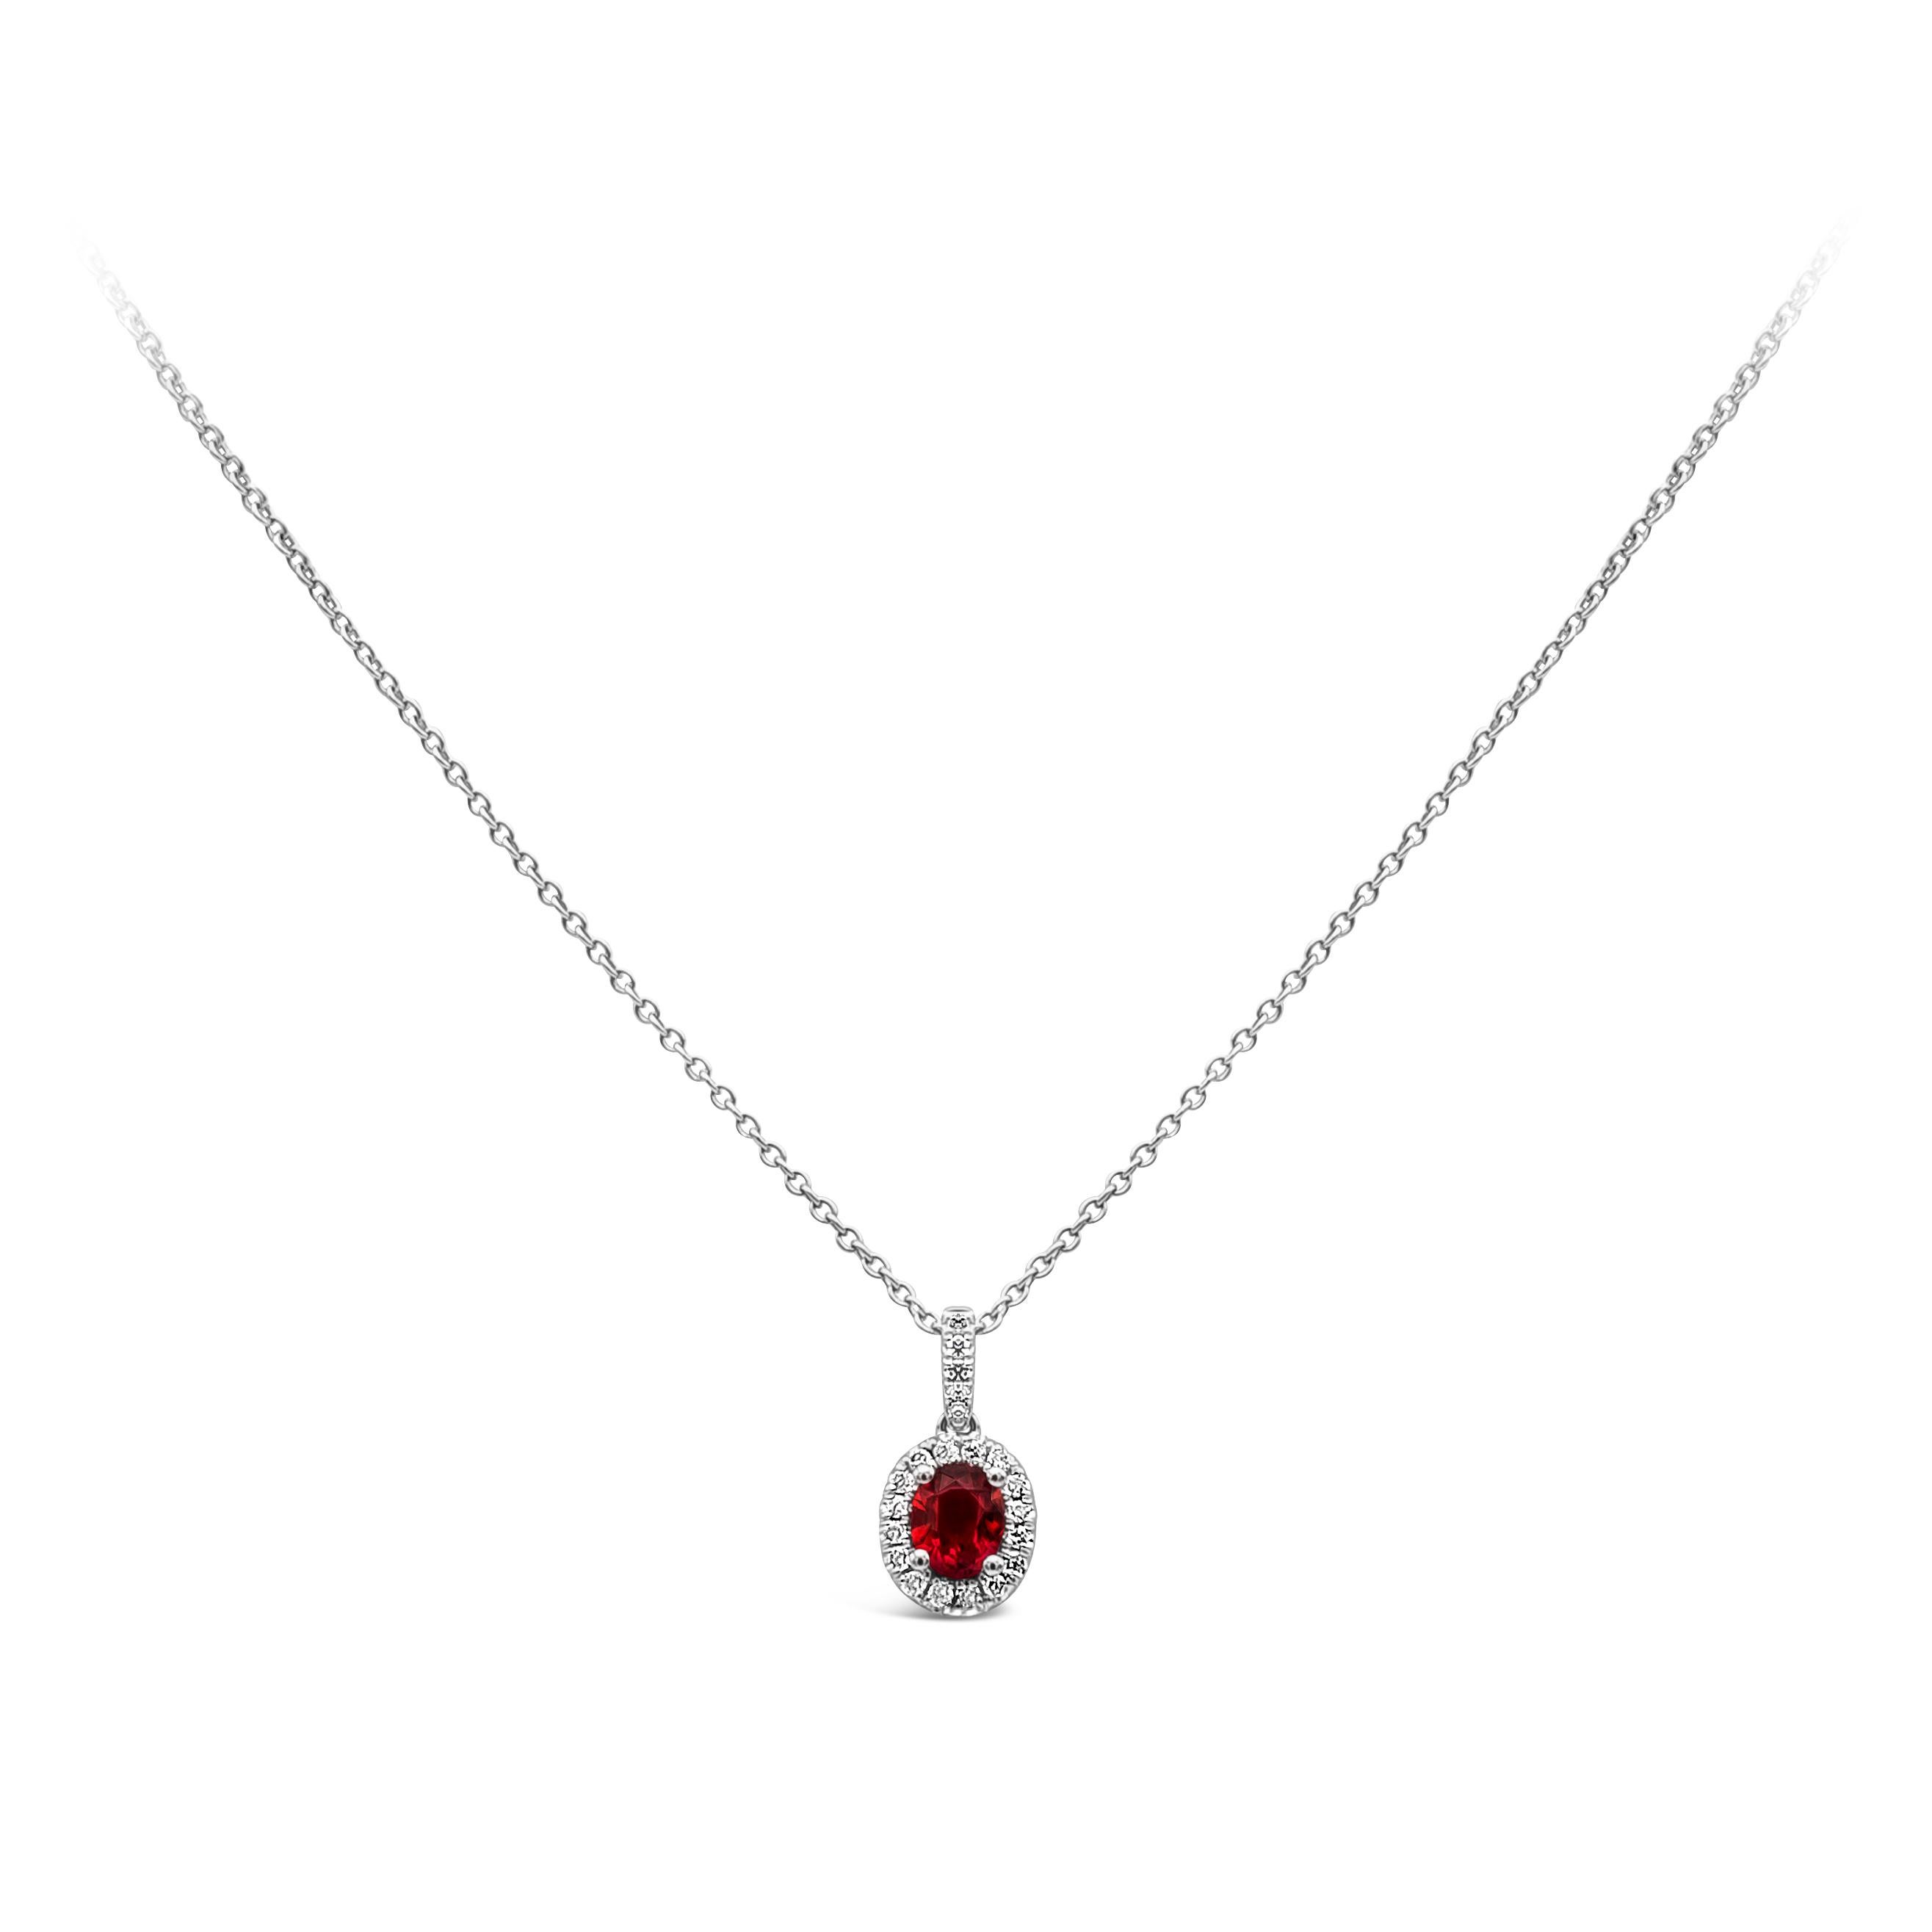 This fancy and unique halo pendant necklace showcasing an oval cut ruby weighing 0.38 carat, embellished by 21 pieces of round diamonds, weighing 0.10 carat total, F color and VS in clarity. Made with 14k and 18K White Gold. Suspended on 18 inches